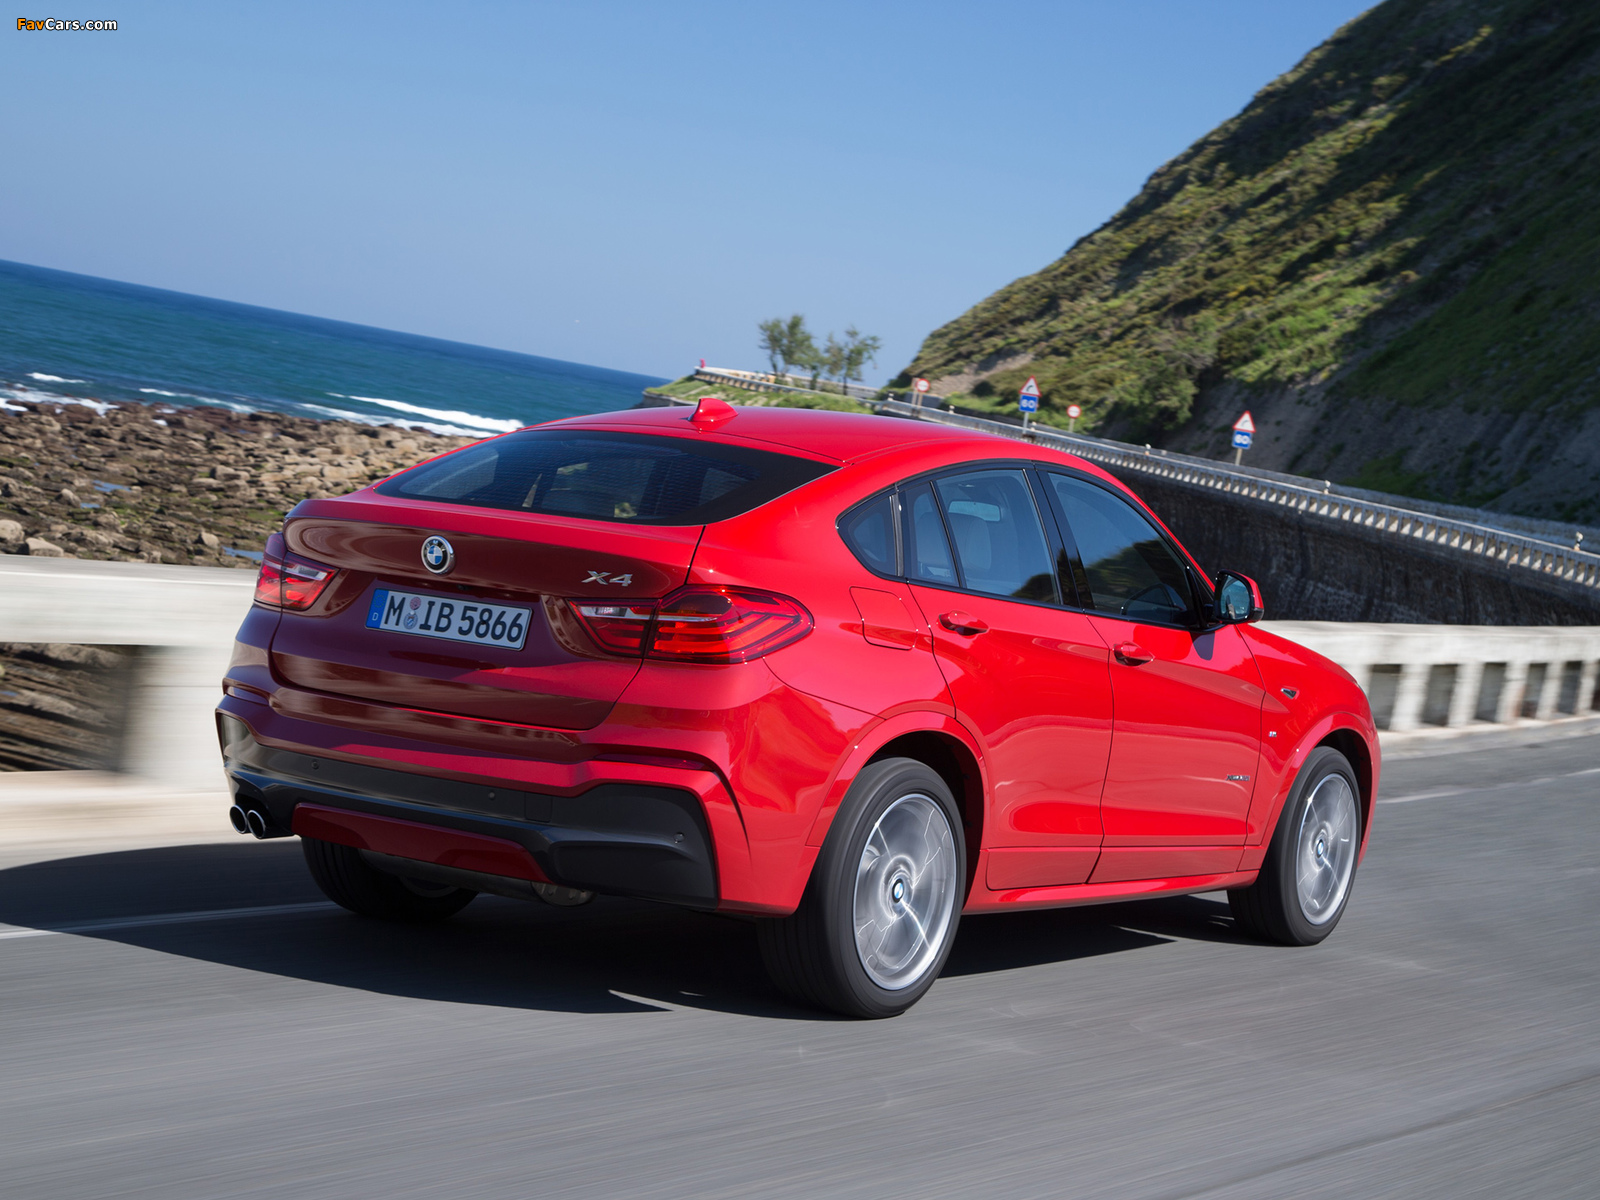 BMW X4 xDrive35i M Sports Package (F26) 2014 pictures (1600 x 1200)